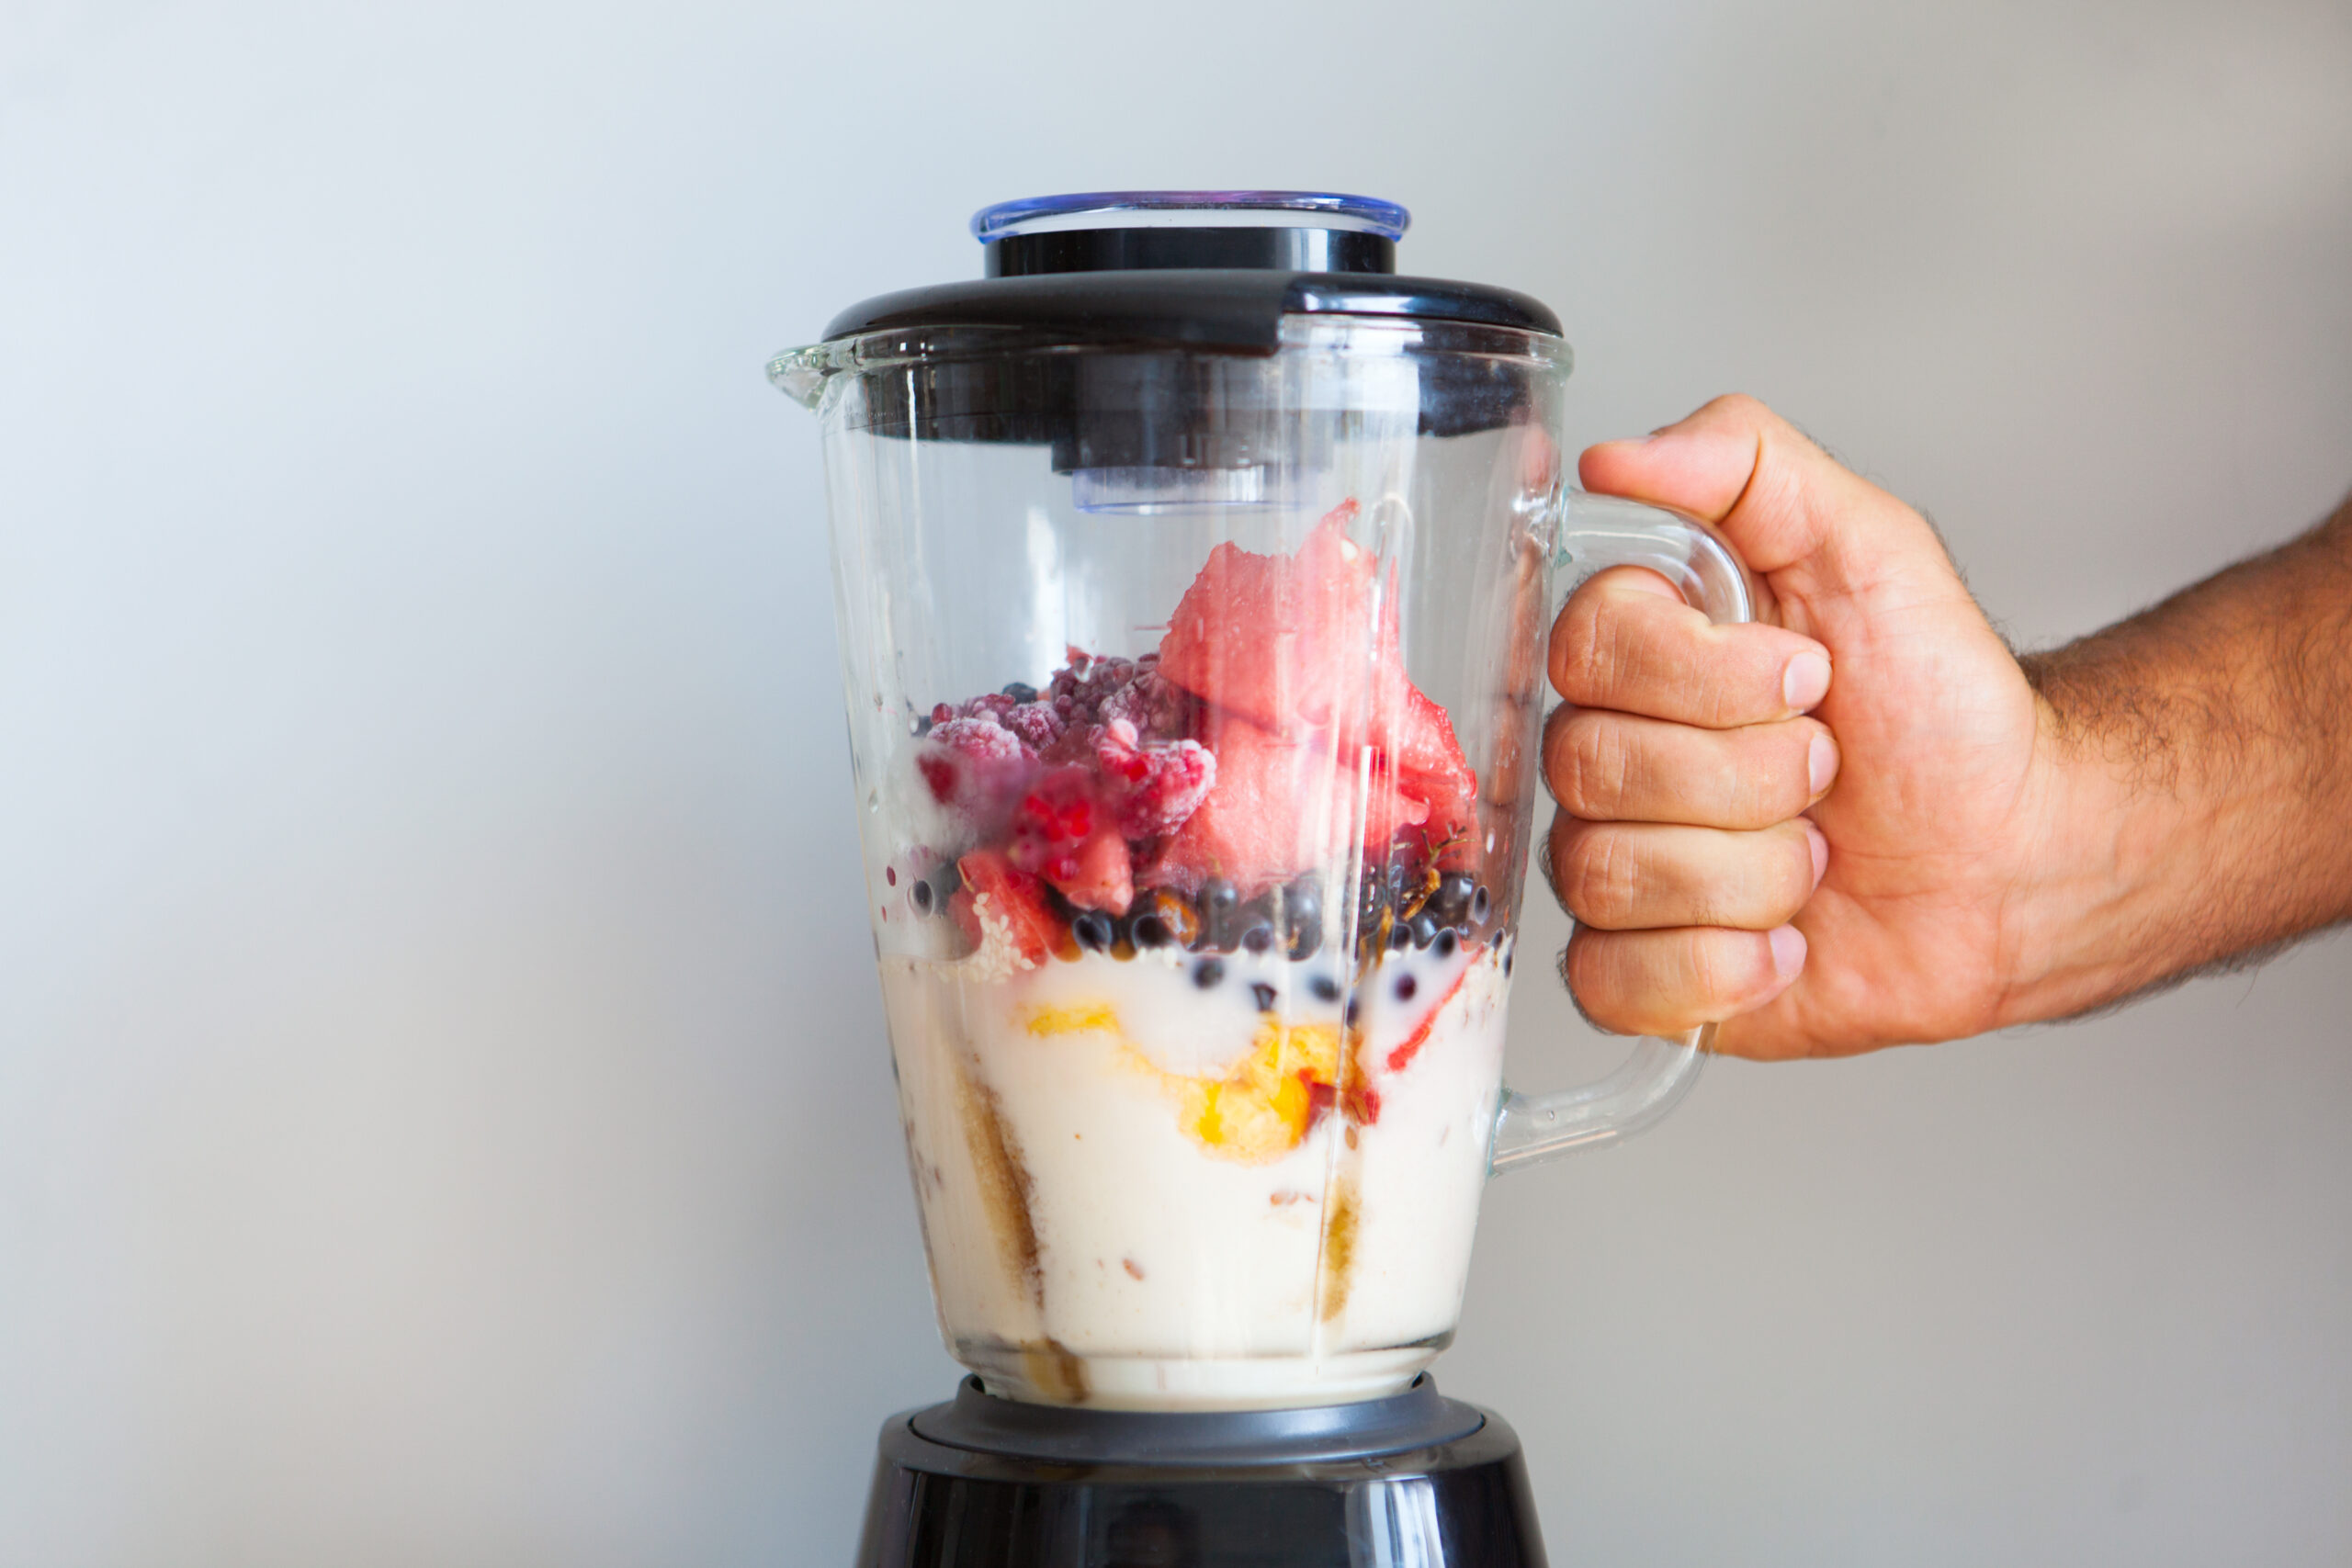 Men's hand hold blender filled with fresh whole fruits for making a smoothie or juice. Closeup